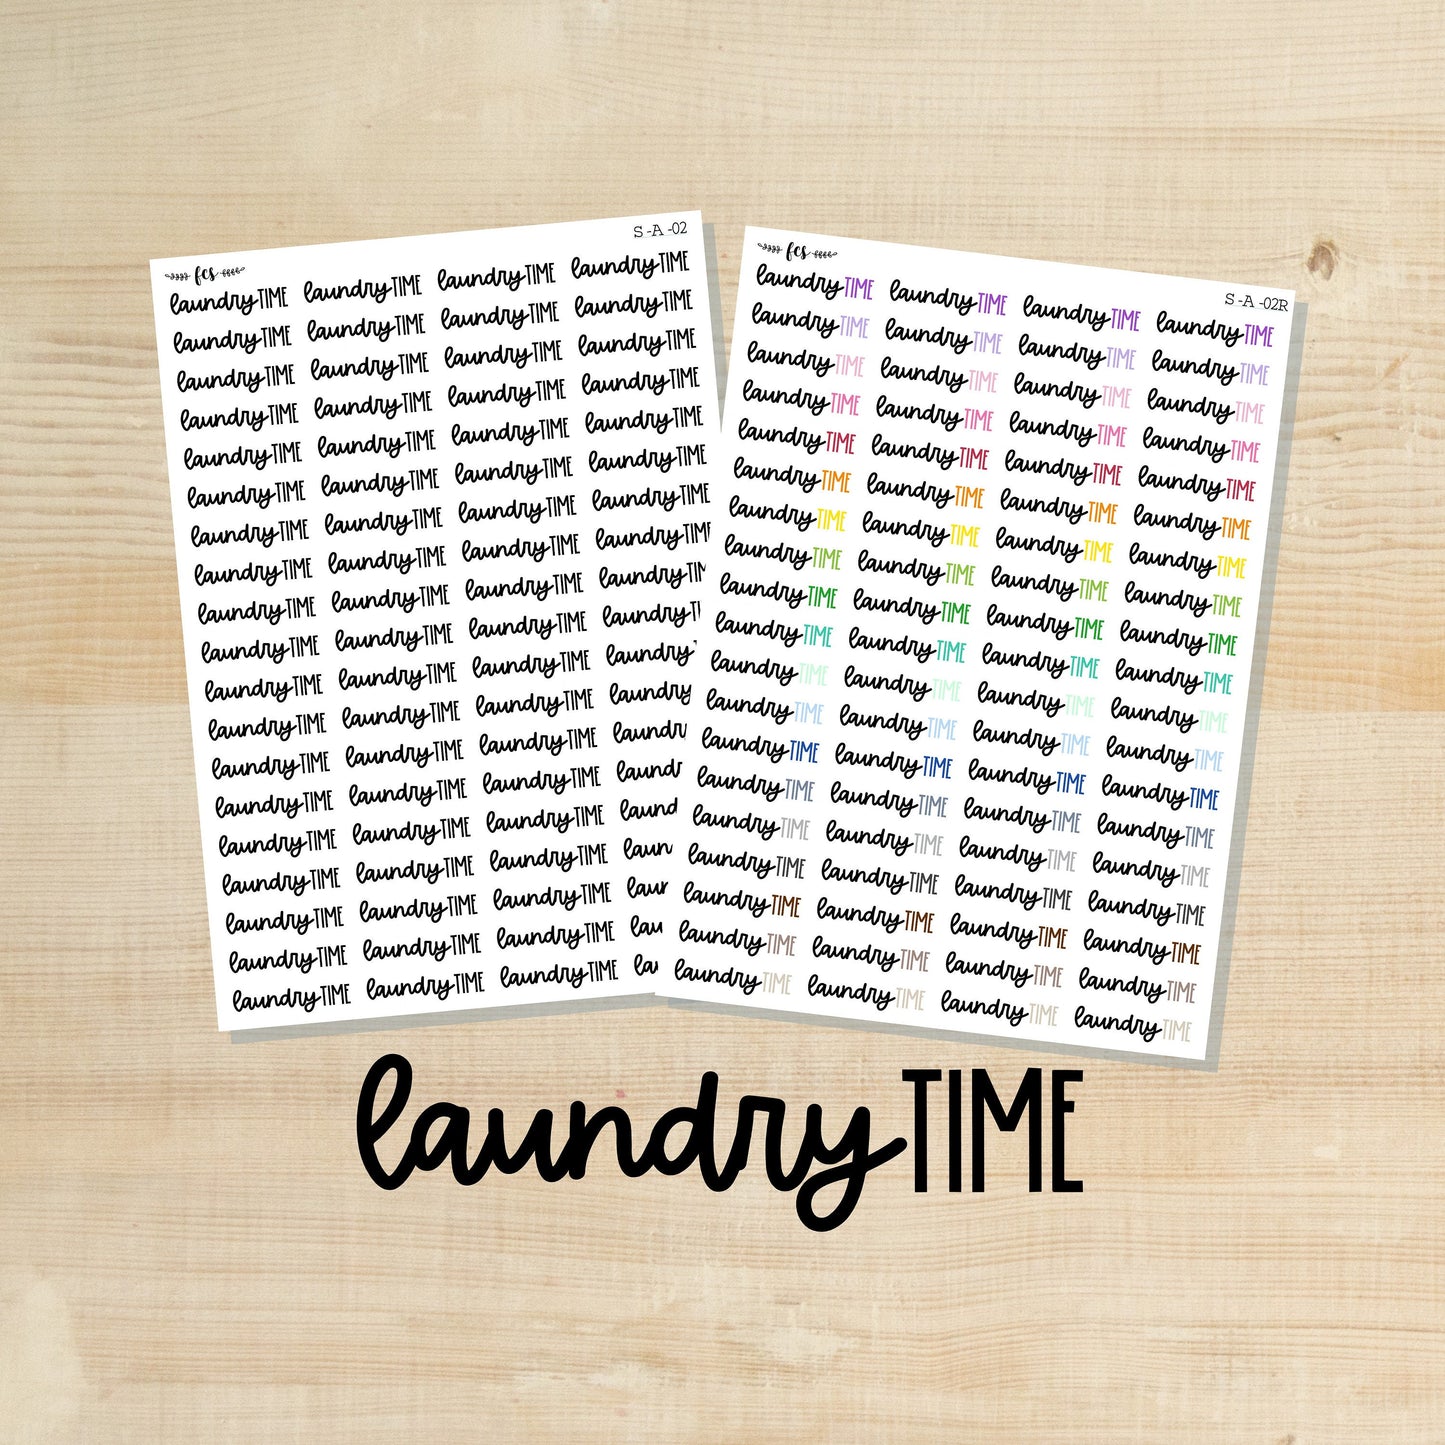 S-A-02 || LAUNDRY TIME script stickers